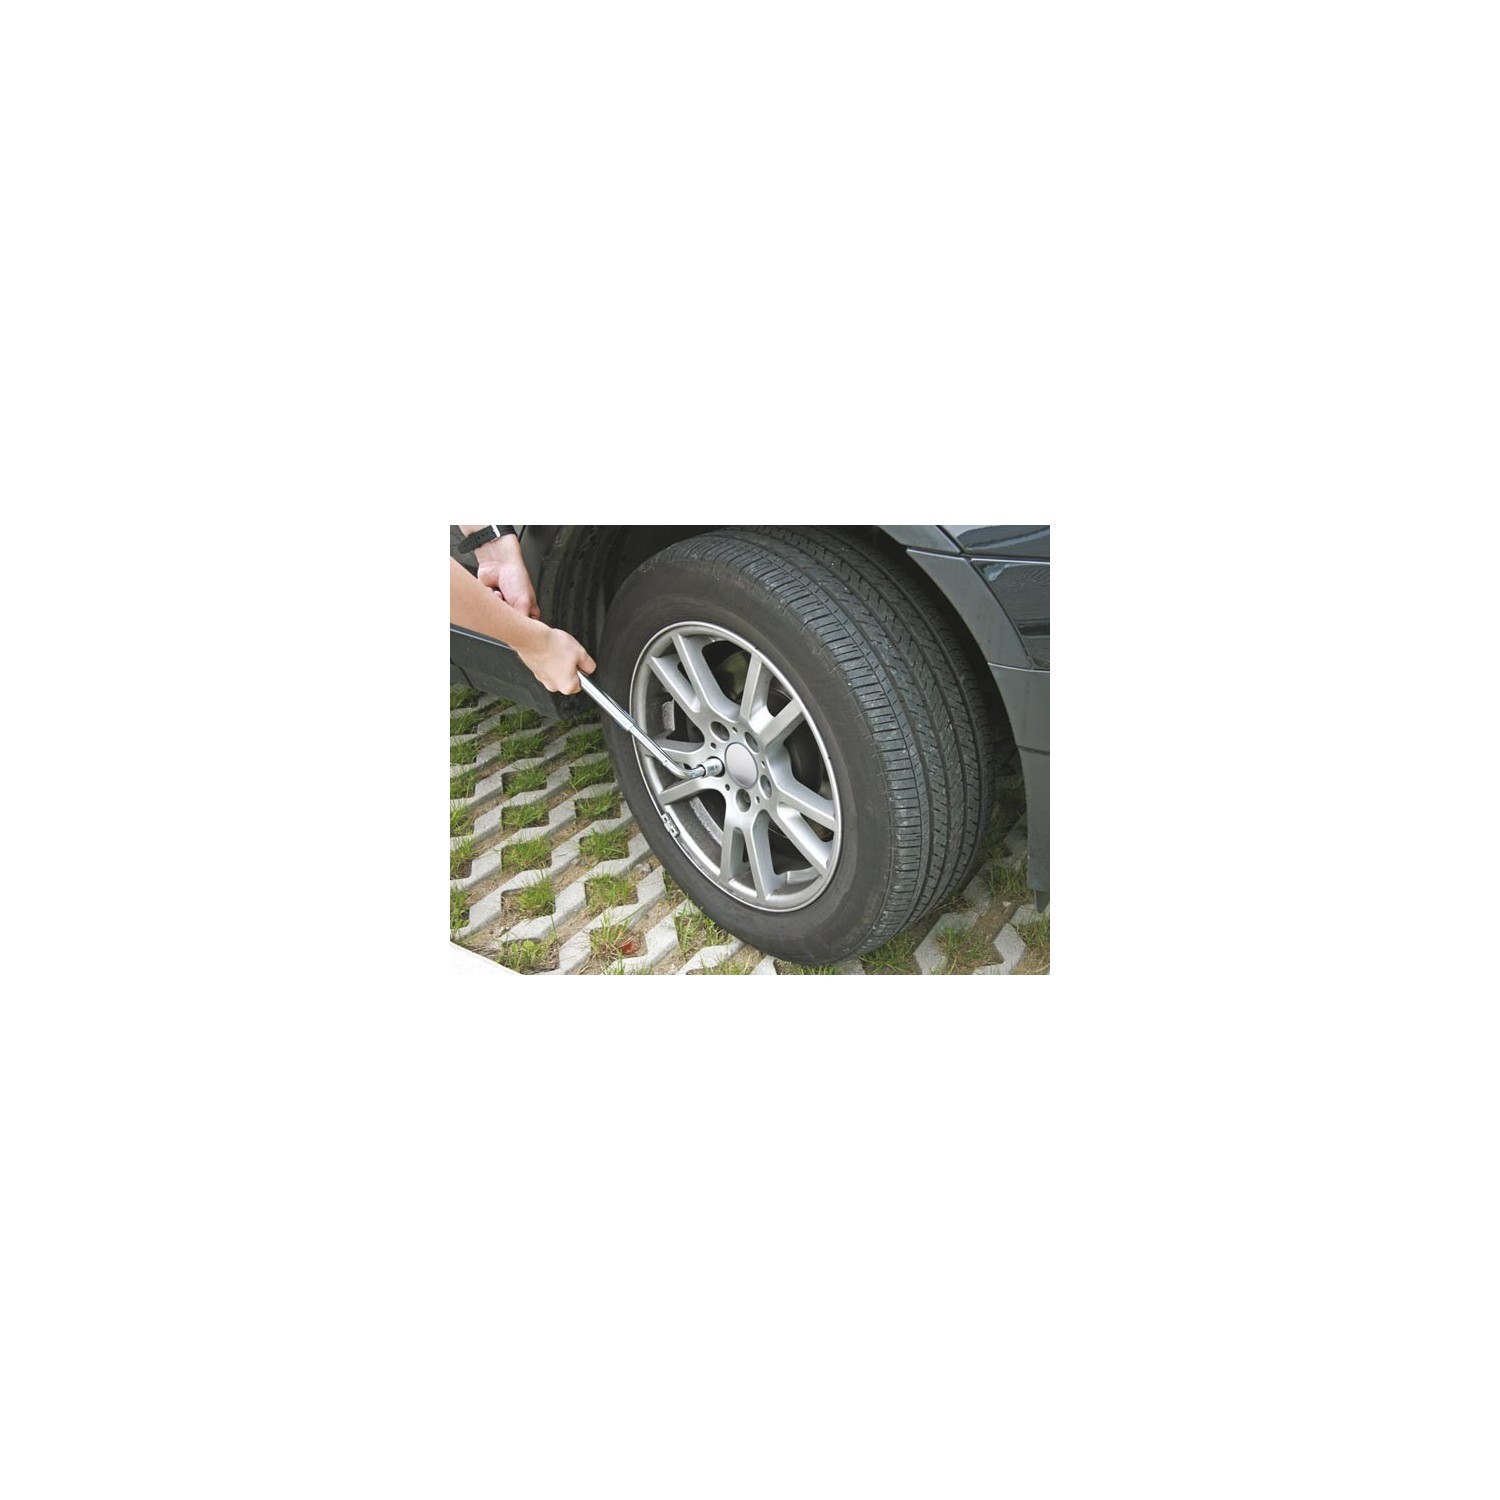 Cle demonte roue 17-19 mm avec embout 21-23 mm voiture 4x4 fourgon camion